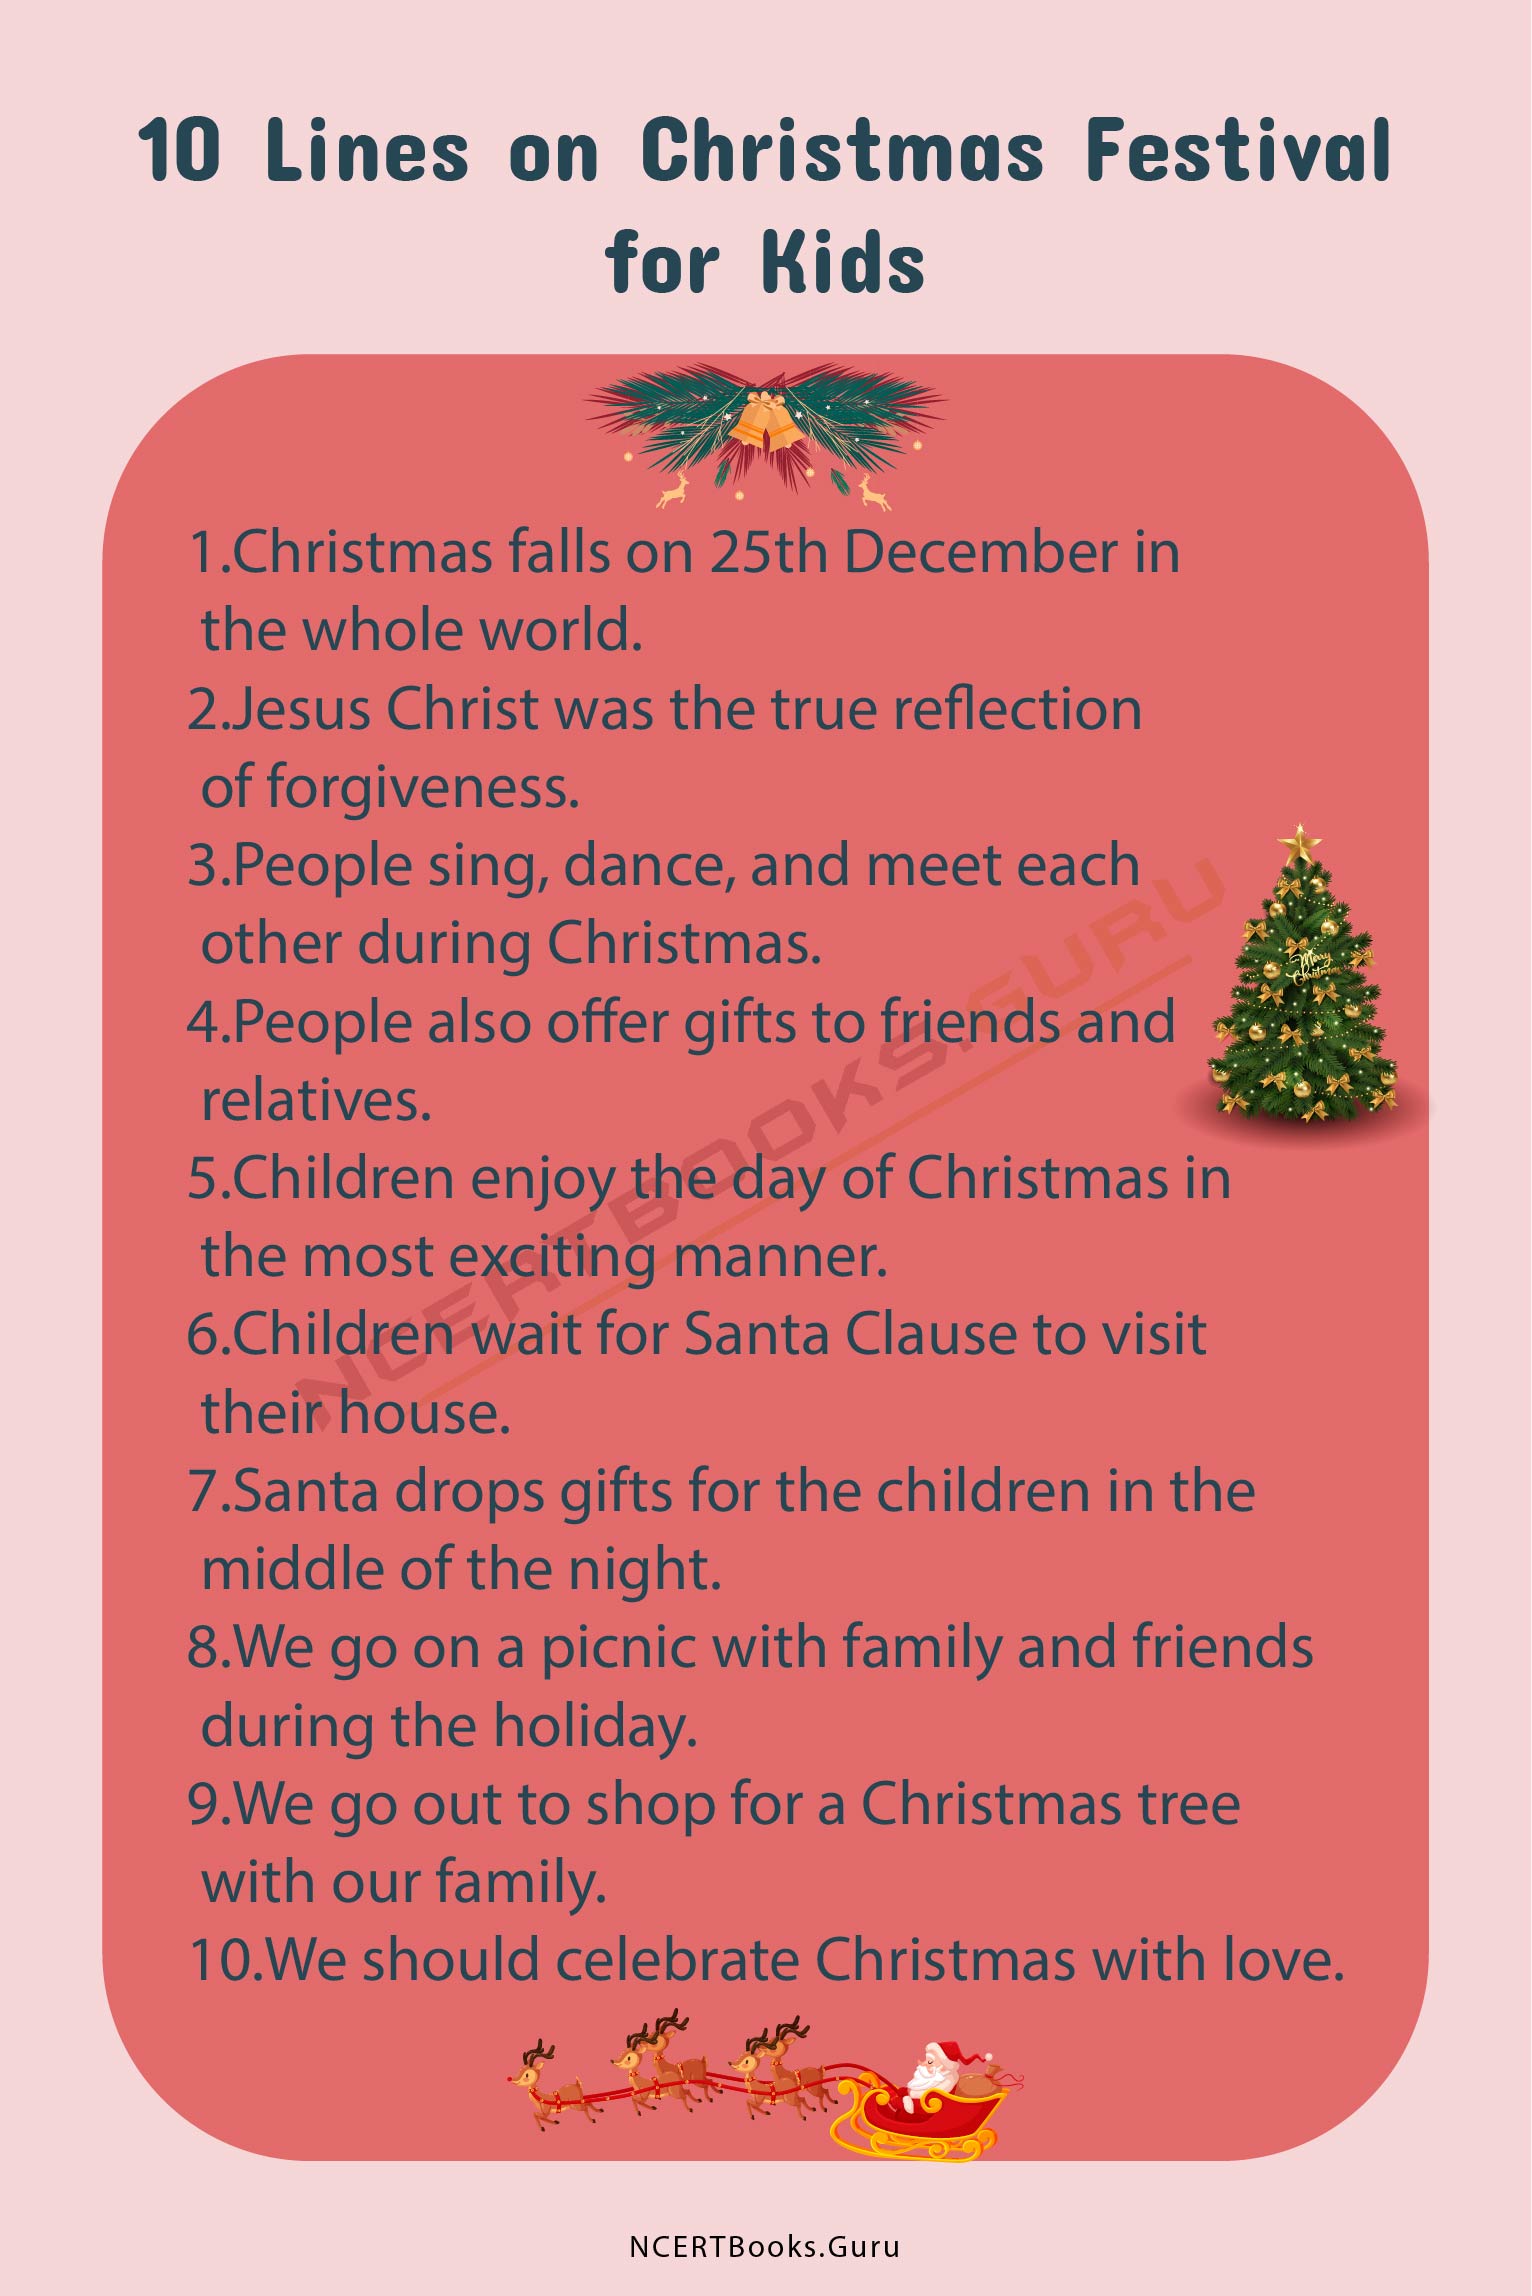 10 Lines on Christmas Festival 1